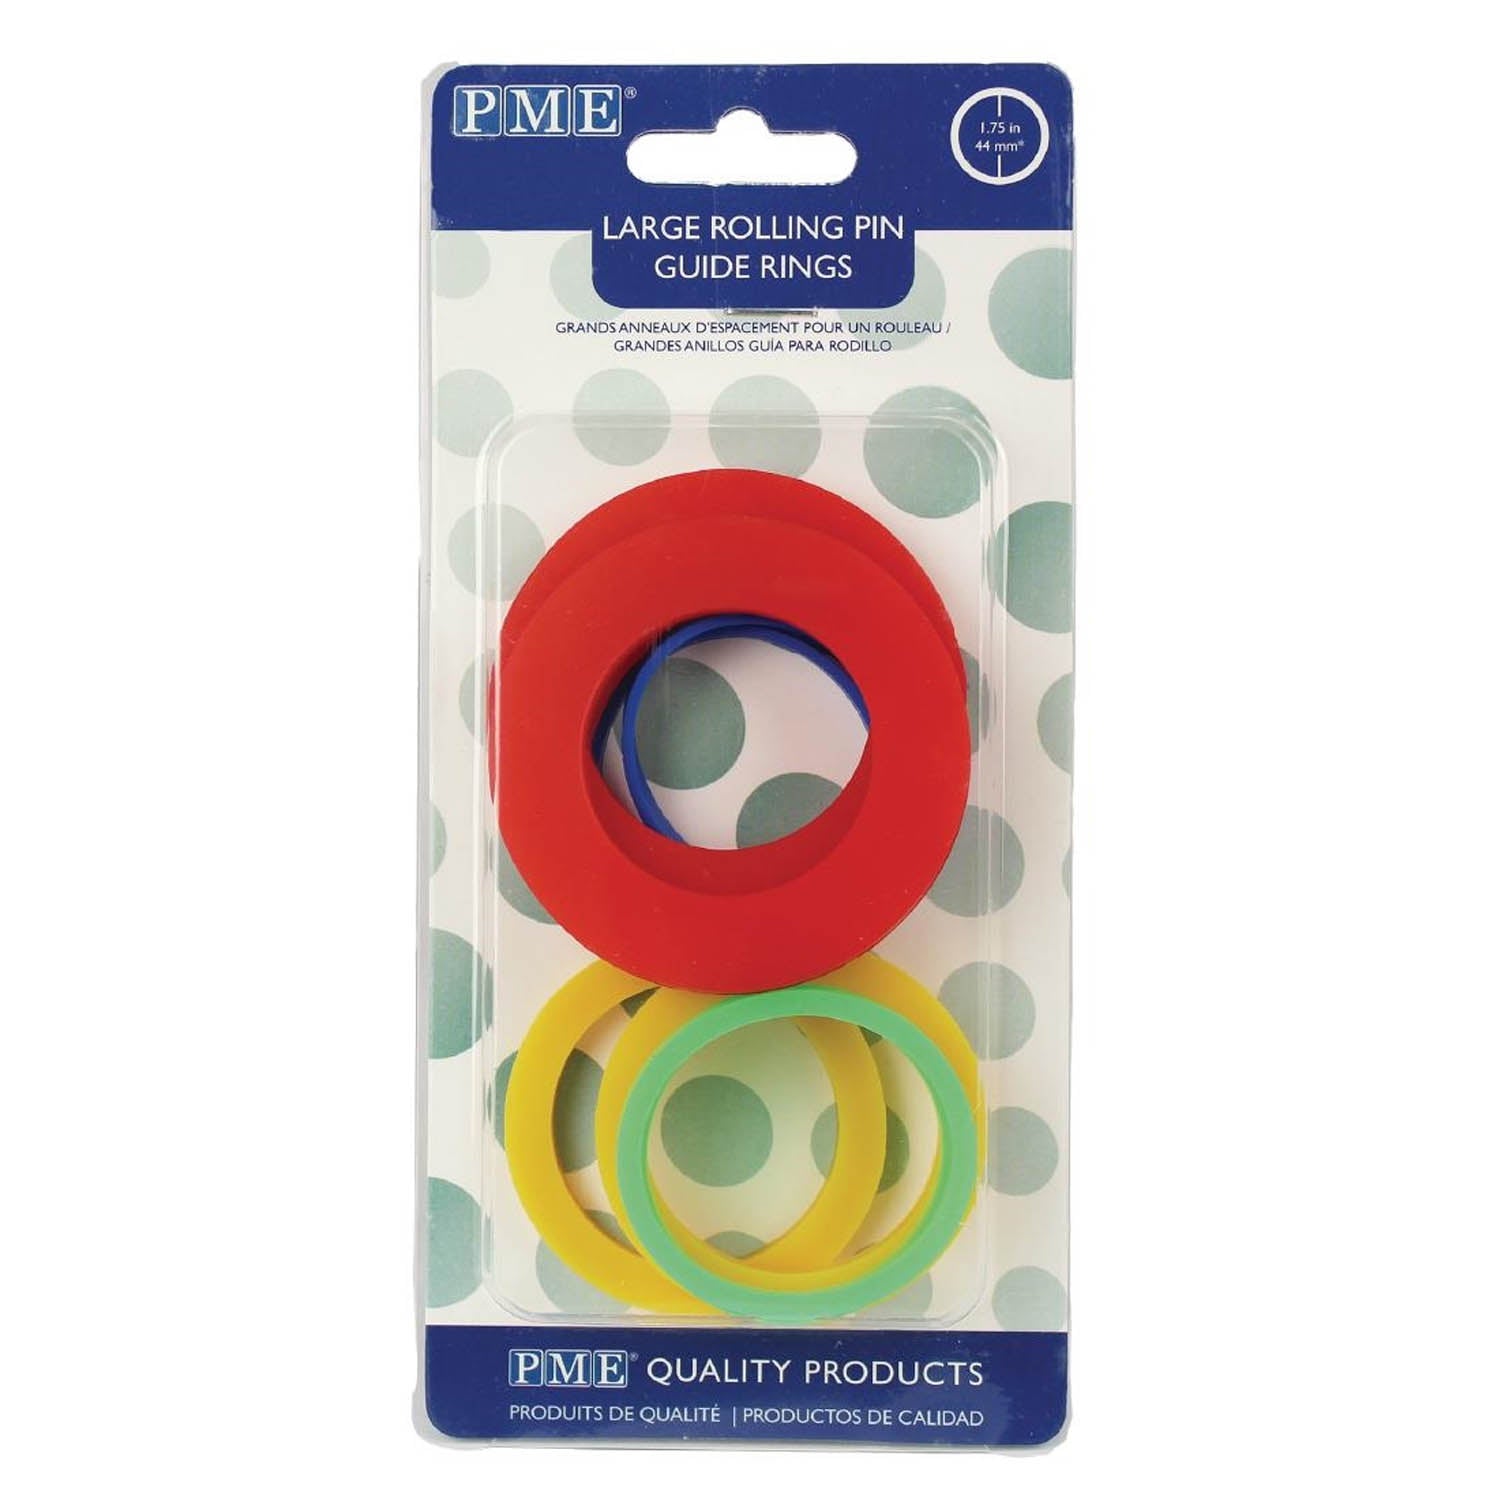 PME Large Rolling Pin Guide Rings